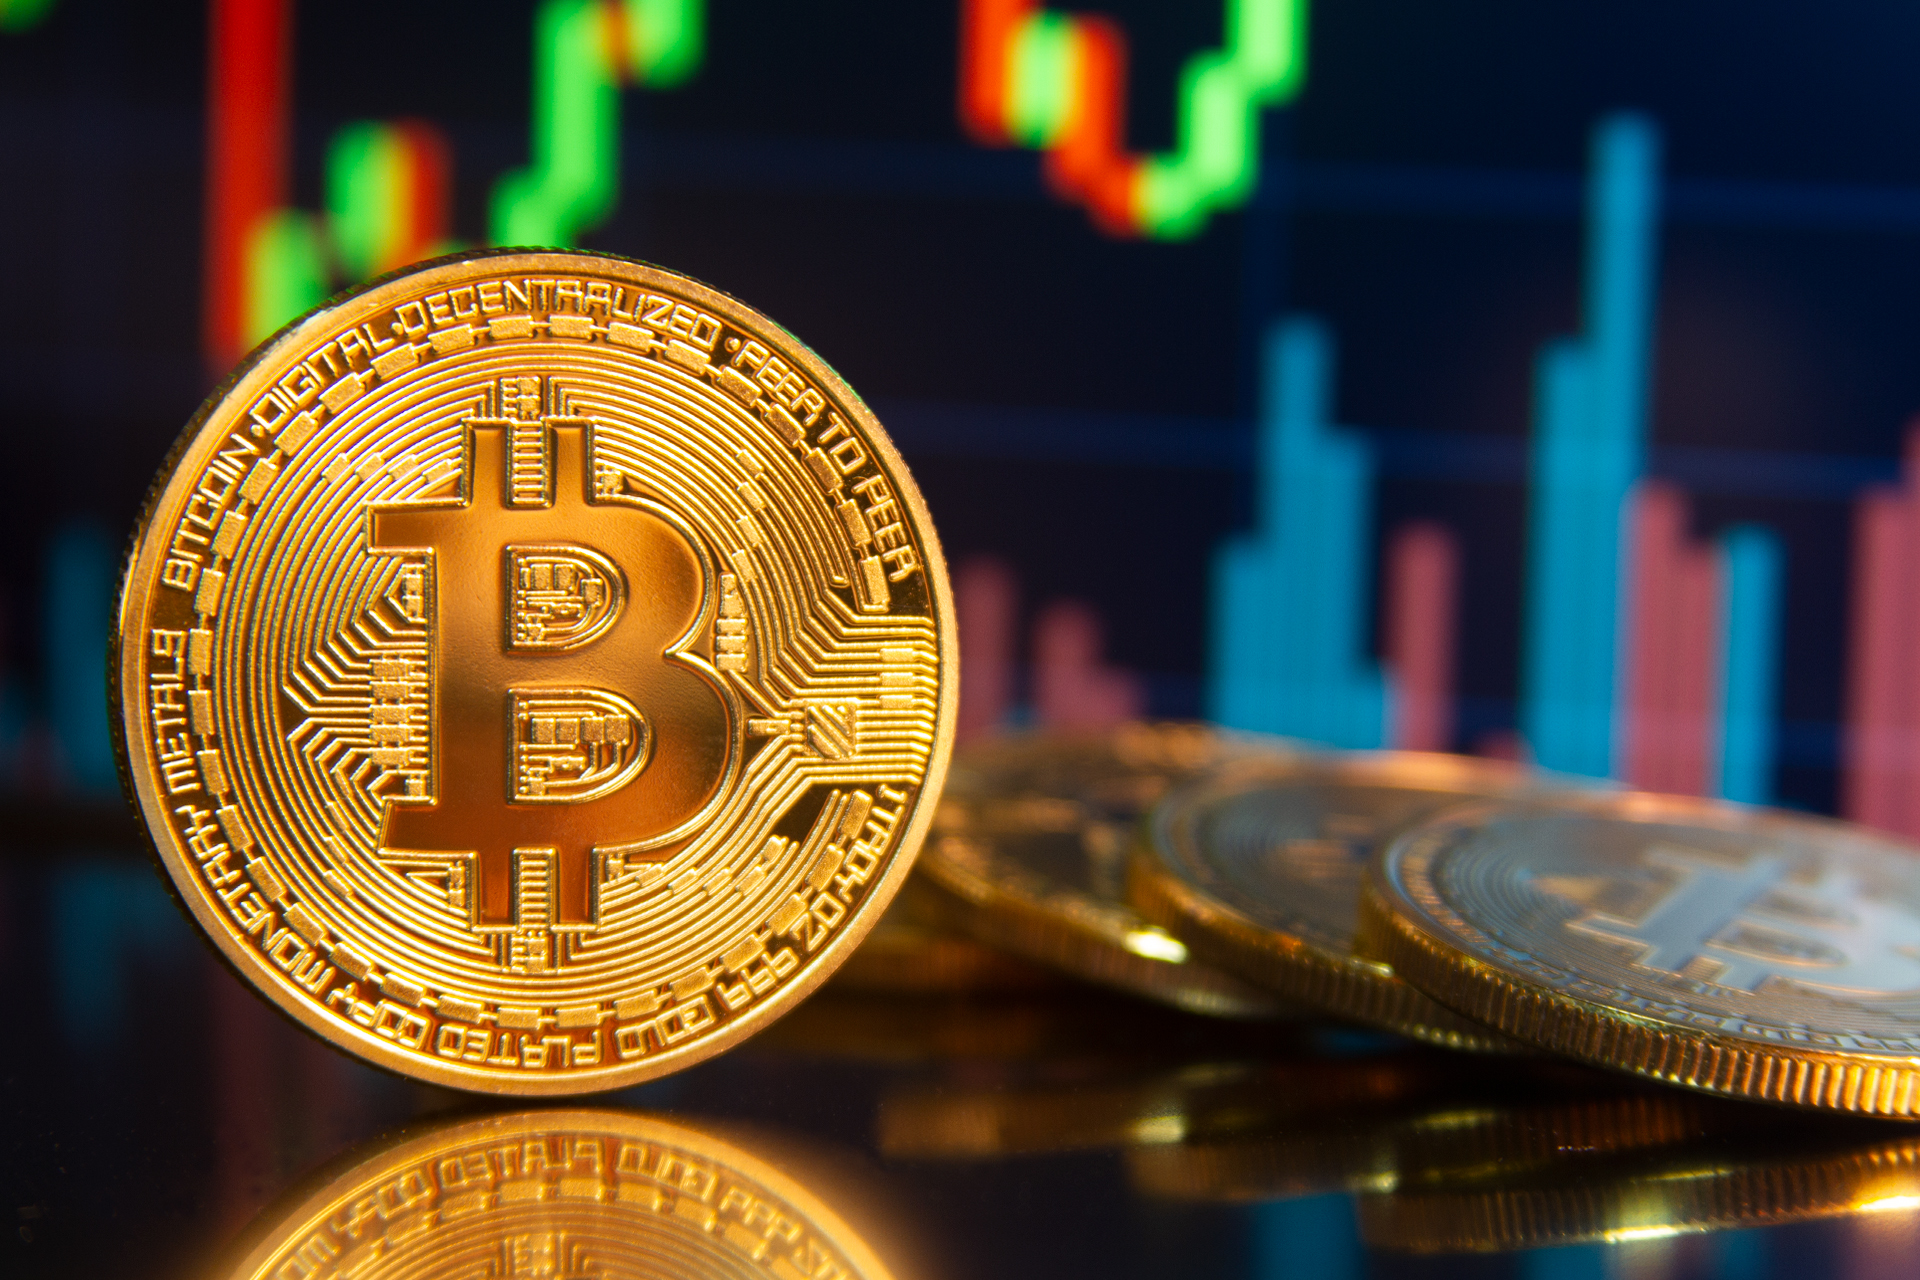 Bitcoin on edge in front of stock charts free image download